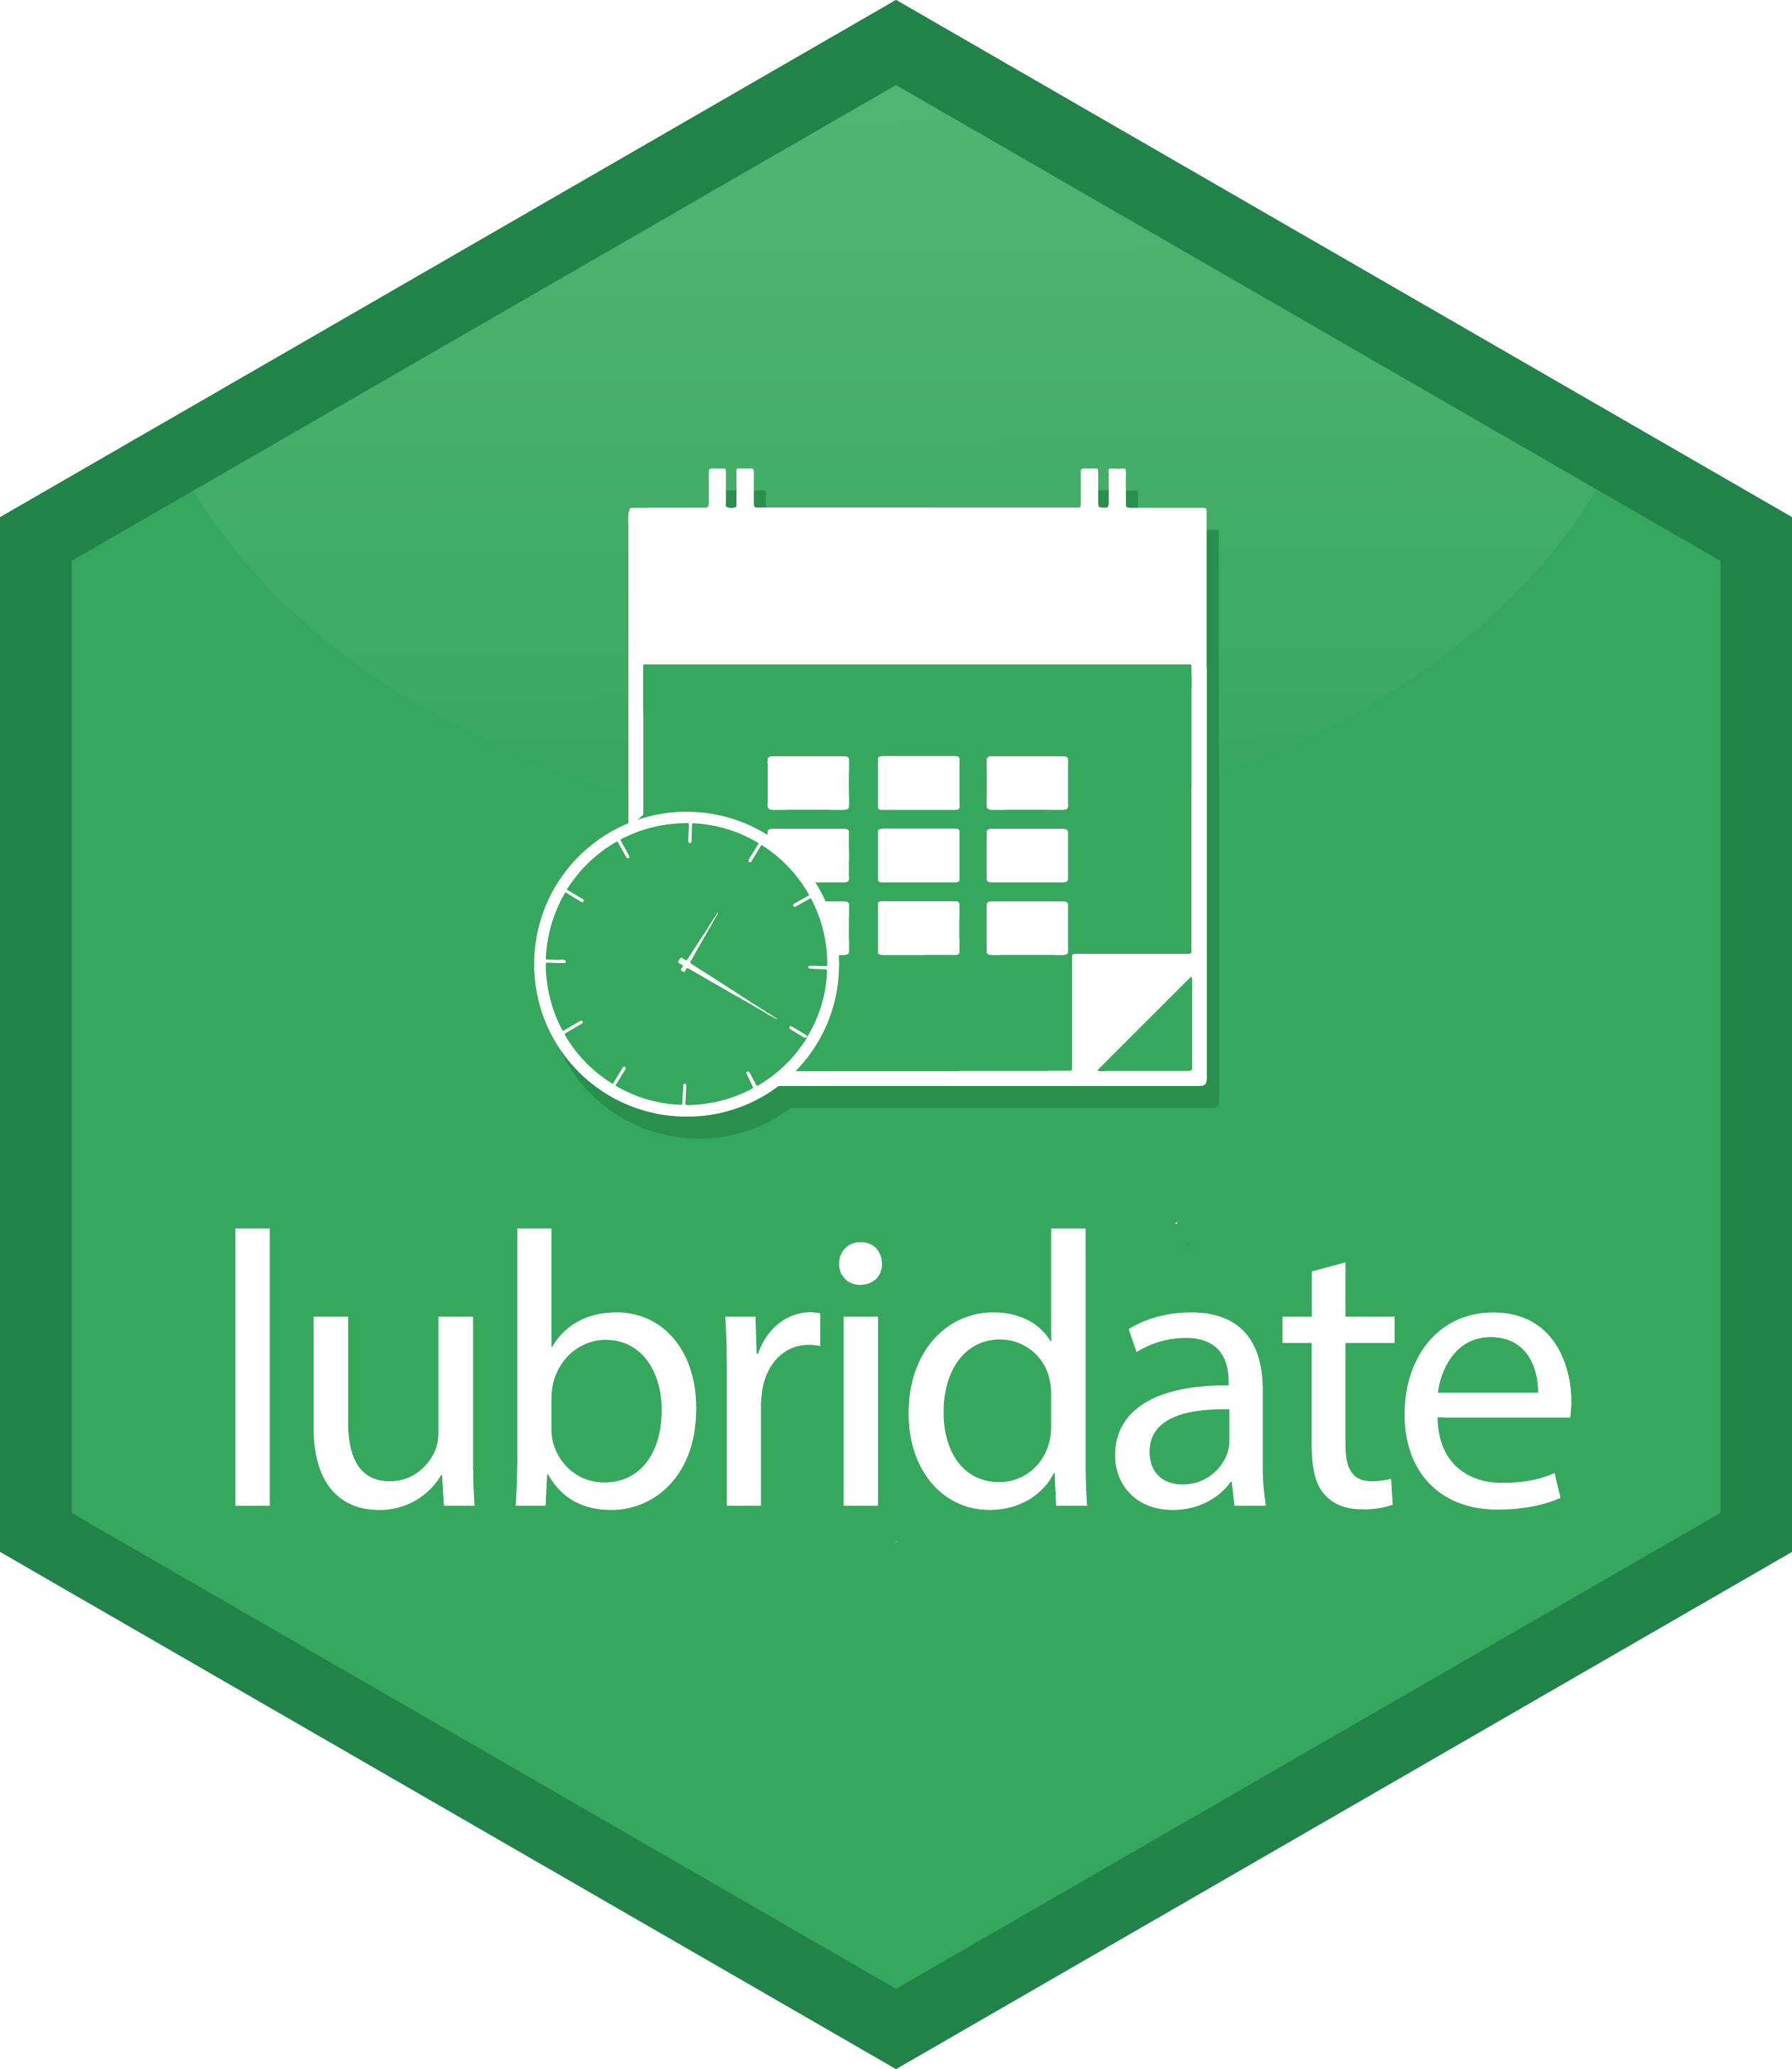 Lubridate package hex sticker with a calendar